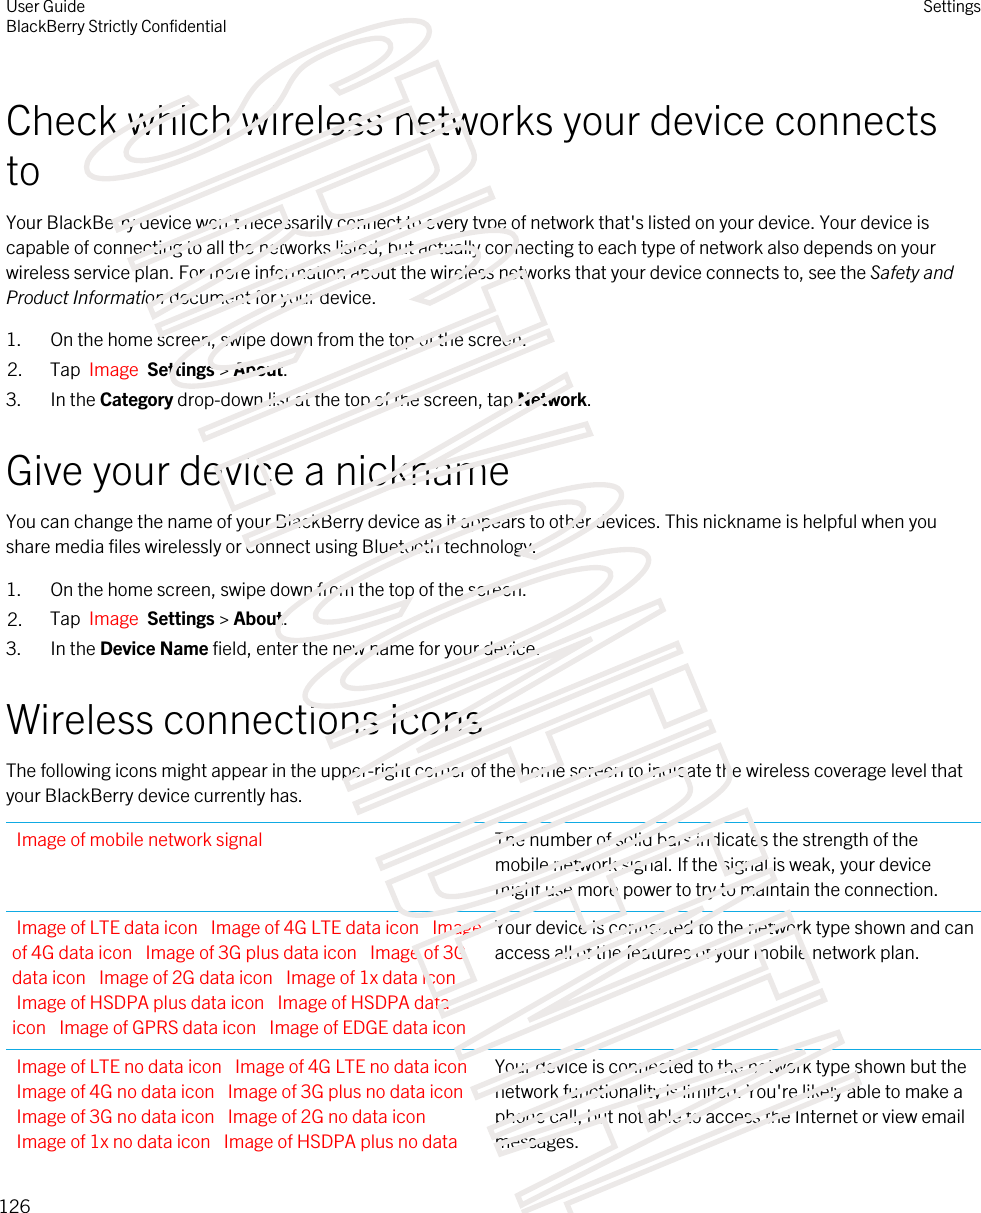 Check which wireless networks your device connects toYour BlackBerry device won&apos;t necessarily connect to every type of network that&apos;s listed on your device. Your device is capable of connecting to all the networks listed, but actually connecting to each type of network also depends on your wireless service plan. For more information about the wireless networks that your device connects to, see the Safety and Product Information document for your device.1. On the home screen, swipe down from the top of the screen.2. Tap  Image  Settings &gt; About.3. In the Category drop-down list at the top of the screen, tap Network.Give your device a nicknameYou can change the name of your BlackBerry device as it appears to other devices. This nickname is helpful when you share media files wirelessly or connect using Bluetooth technology.1. On the home screen, swipe down from the top of the screen.2. Tap  Image  Settings &gt; About.3. In the Device Name field, enter the new name for your device.Wireless connections iconsThe following icons might appear in the upper-right corner of the home screen to indicate the wireless coverage level that your BlackBerry device currently has.Image of mobile network signal The number of solid bars indicates the strength of the mobile network signal. If the signal is weak, your device might use more power to try to maintain the connection.Image of LTE data icon  Image of 4G LTE data icon  Image of 4G data icon  Image of 3G plus data icon  Image of 3G data icon  Image of 2G data icon  Image of 1x data icon Image of HSDPA plus data icon  Image of HSDPA data icon  Image of GPRS data icon  Image of EDGE data iconYour device is connected to the network type shown and can access all of the features of your mobile network plan.Image of LTE no data icon  Image of 4G LTE no data icon Image of 4G no data icon  Image of 3G plus no data icon Image of 3G no data icon  Image of 2G no data icon Image of 1x no data icon  Image of HSDPA plus no data Your device is connected to the network type shown but the network functionality is limited. You&apos;re likely able to make a phone call, but not able to access the Internet or view email messages.User GuideBlackBerry Strictly Confidential Settings126STRICTLY CONFIDENTIAL